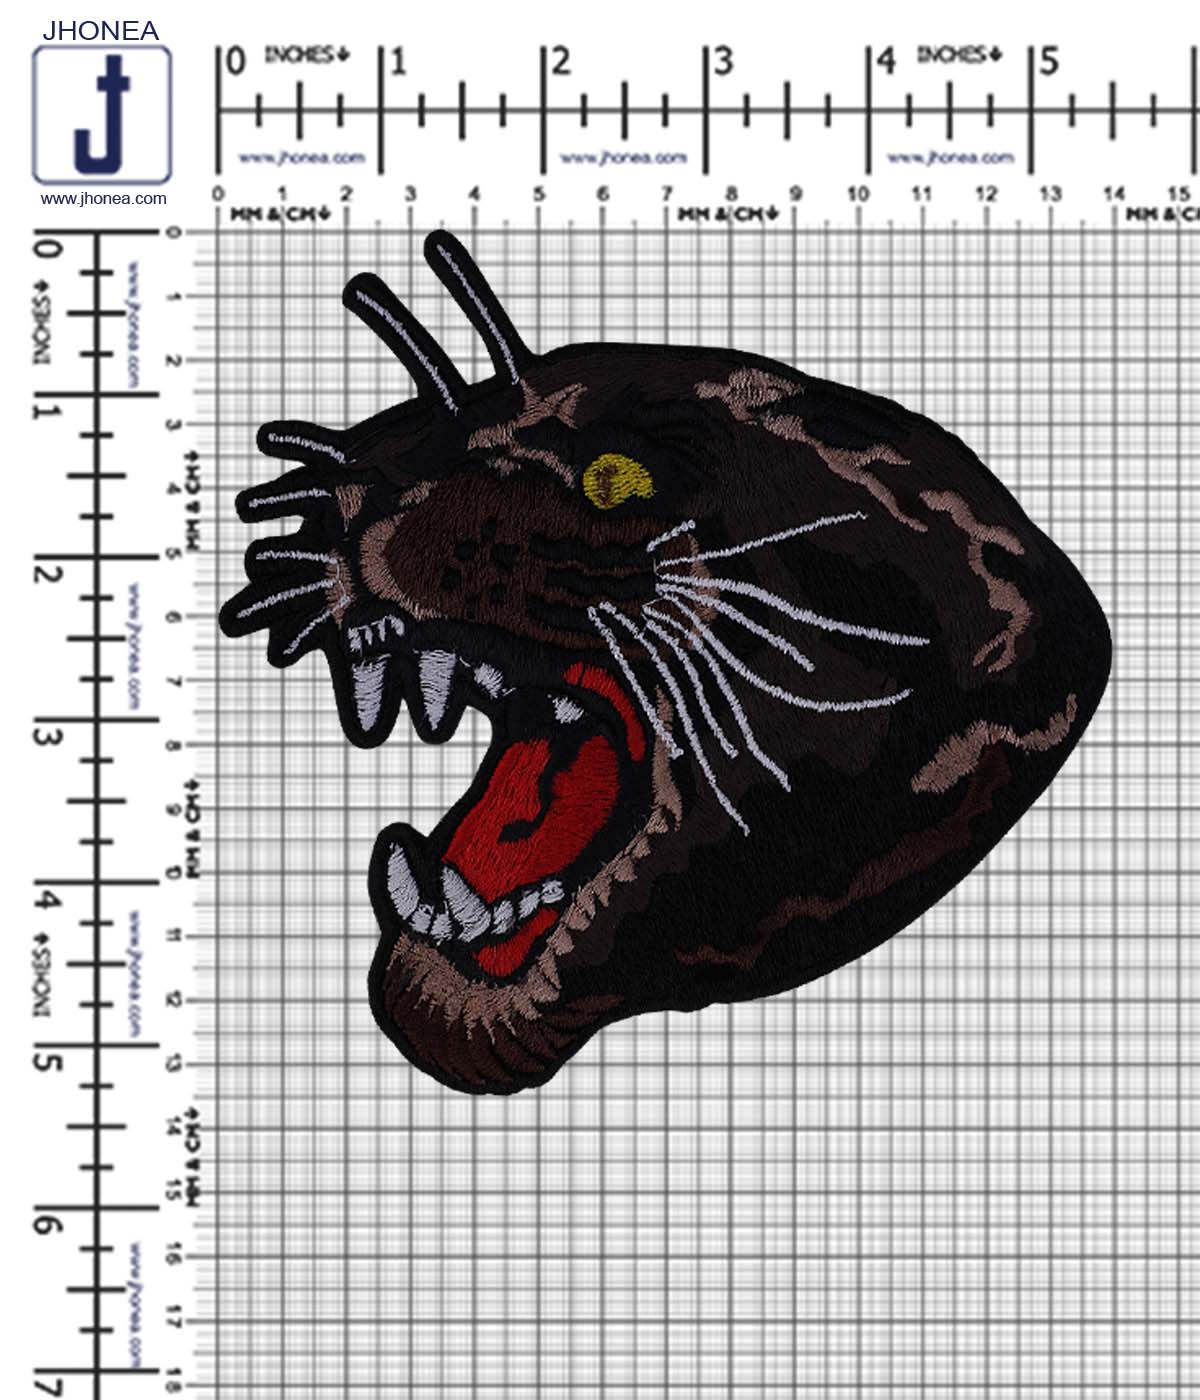 Broad Roaring Tiger Face Embroidery Applique Patch